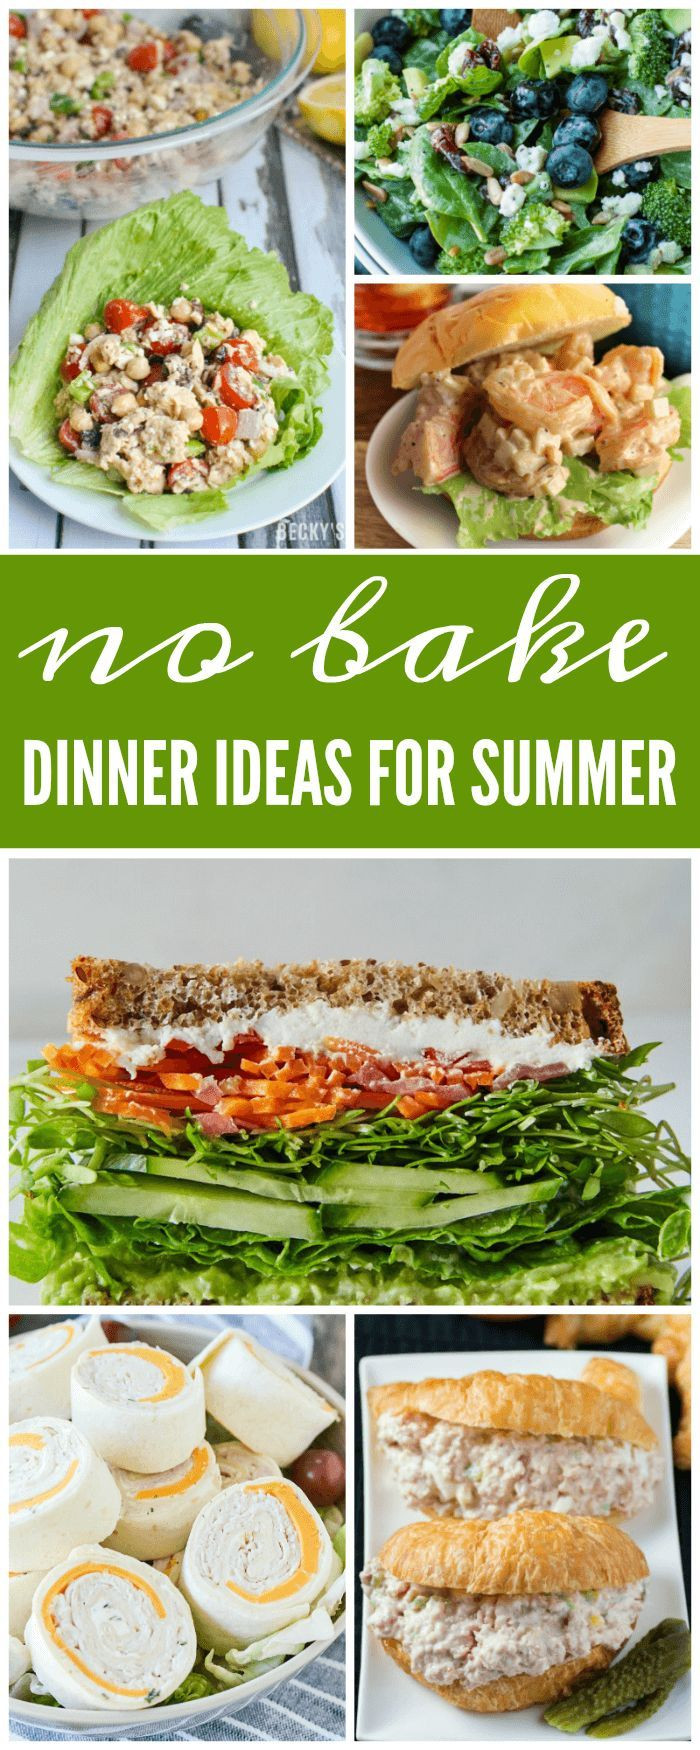 Easy Dinner Party Ideas For 8
 No Bake Dinner Ideas for Summer perfect backyard barbecue